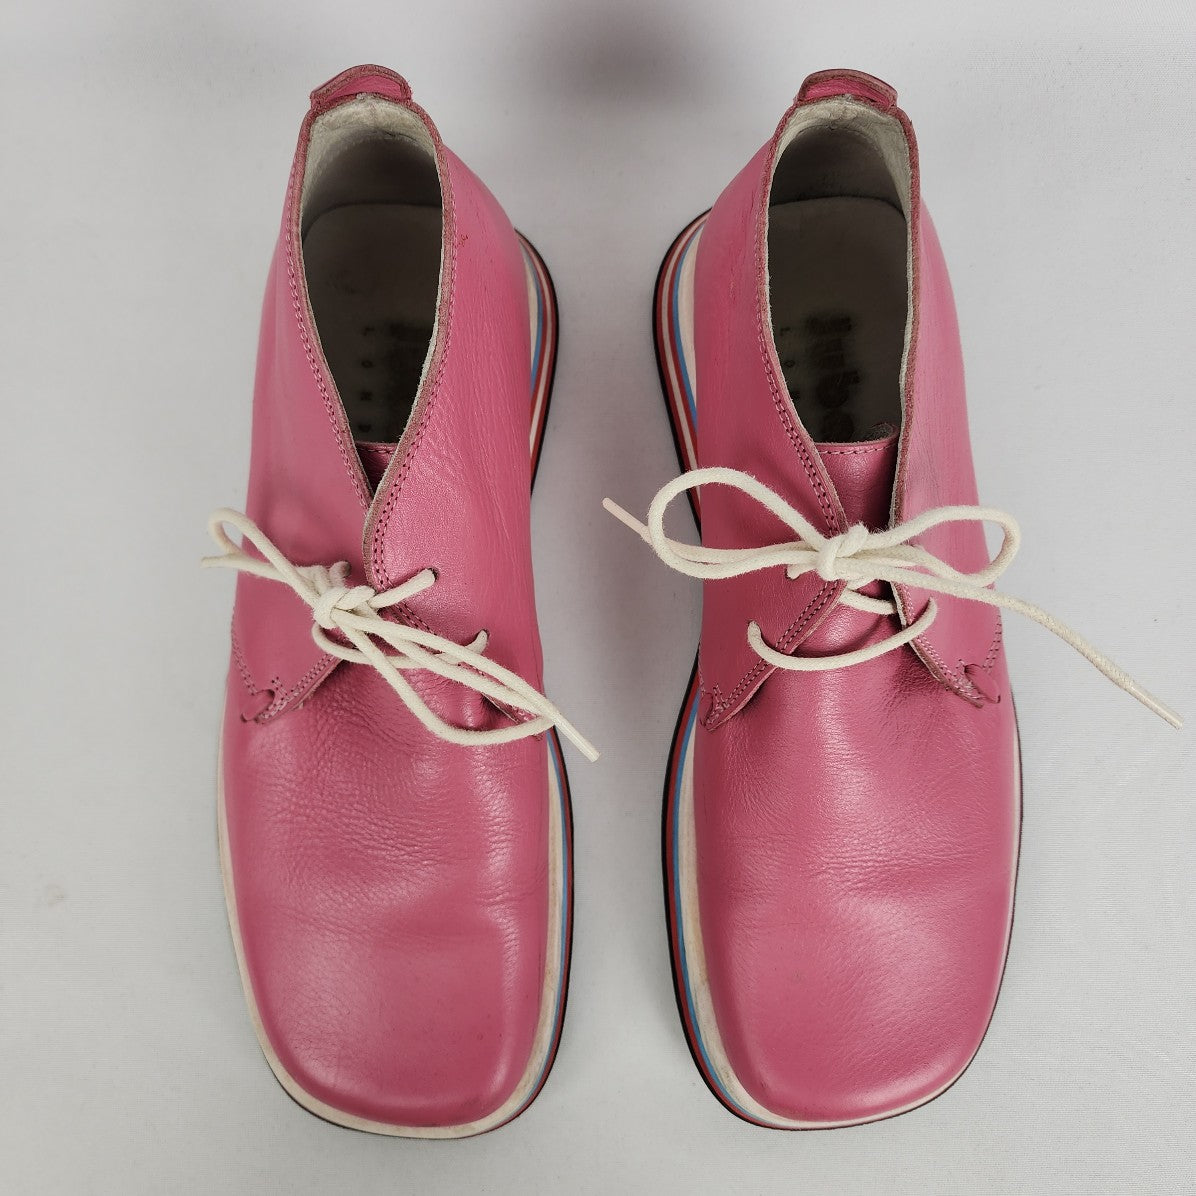 Jubaki London Pink Leather Lace Up Shoes Size 8.5